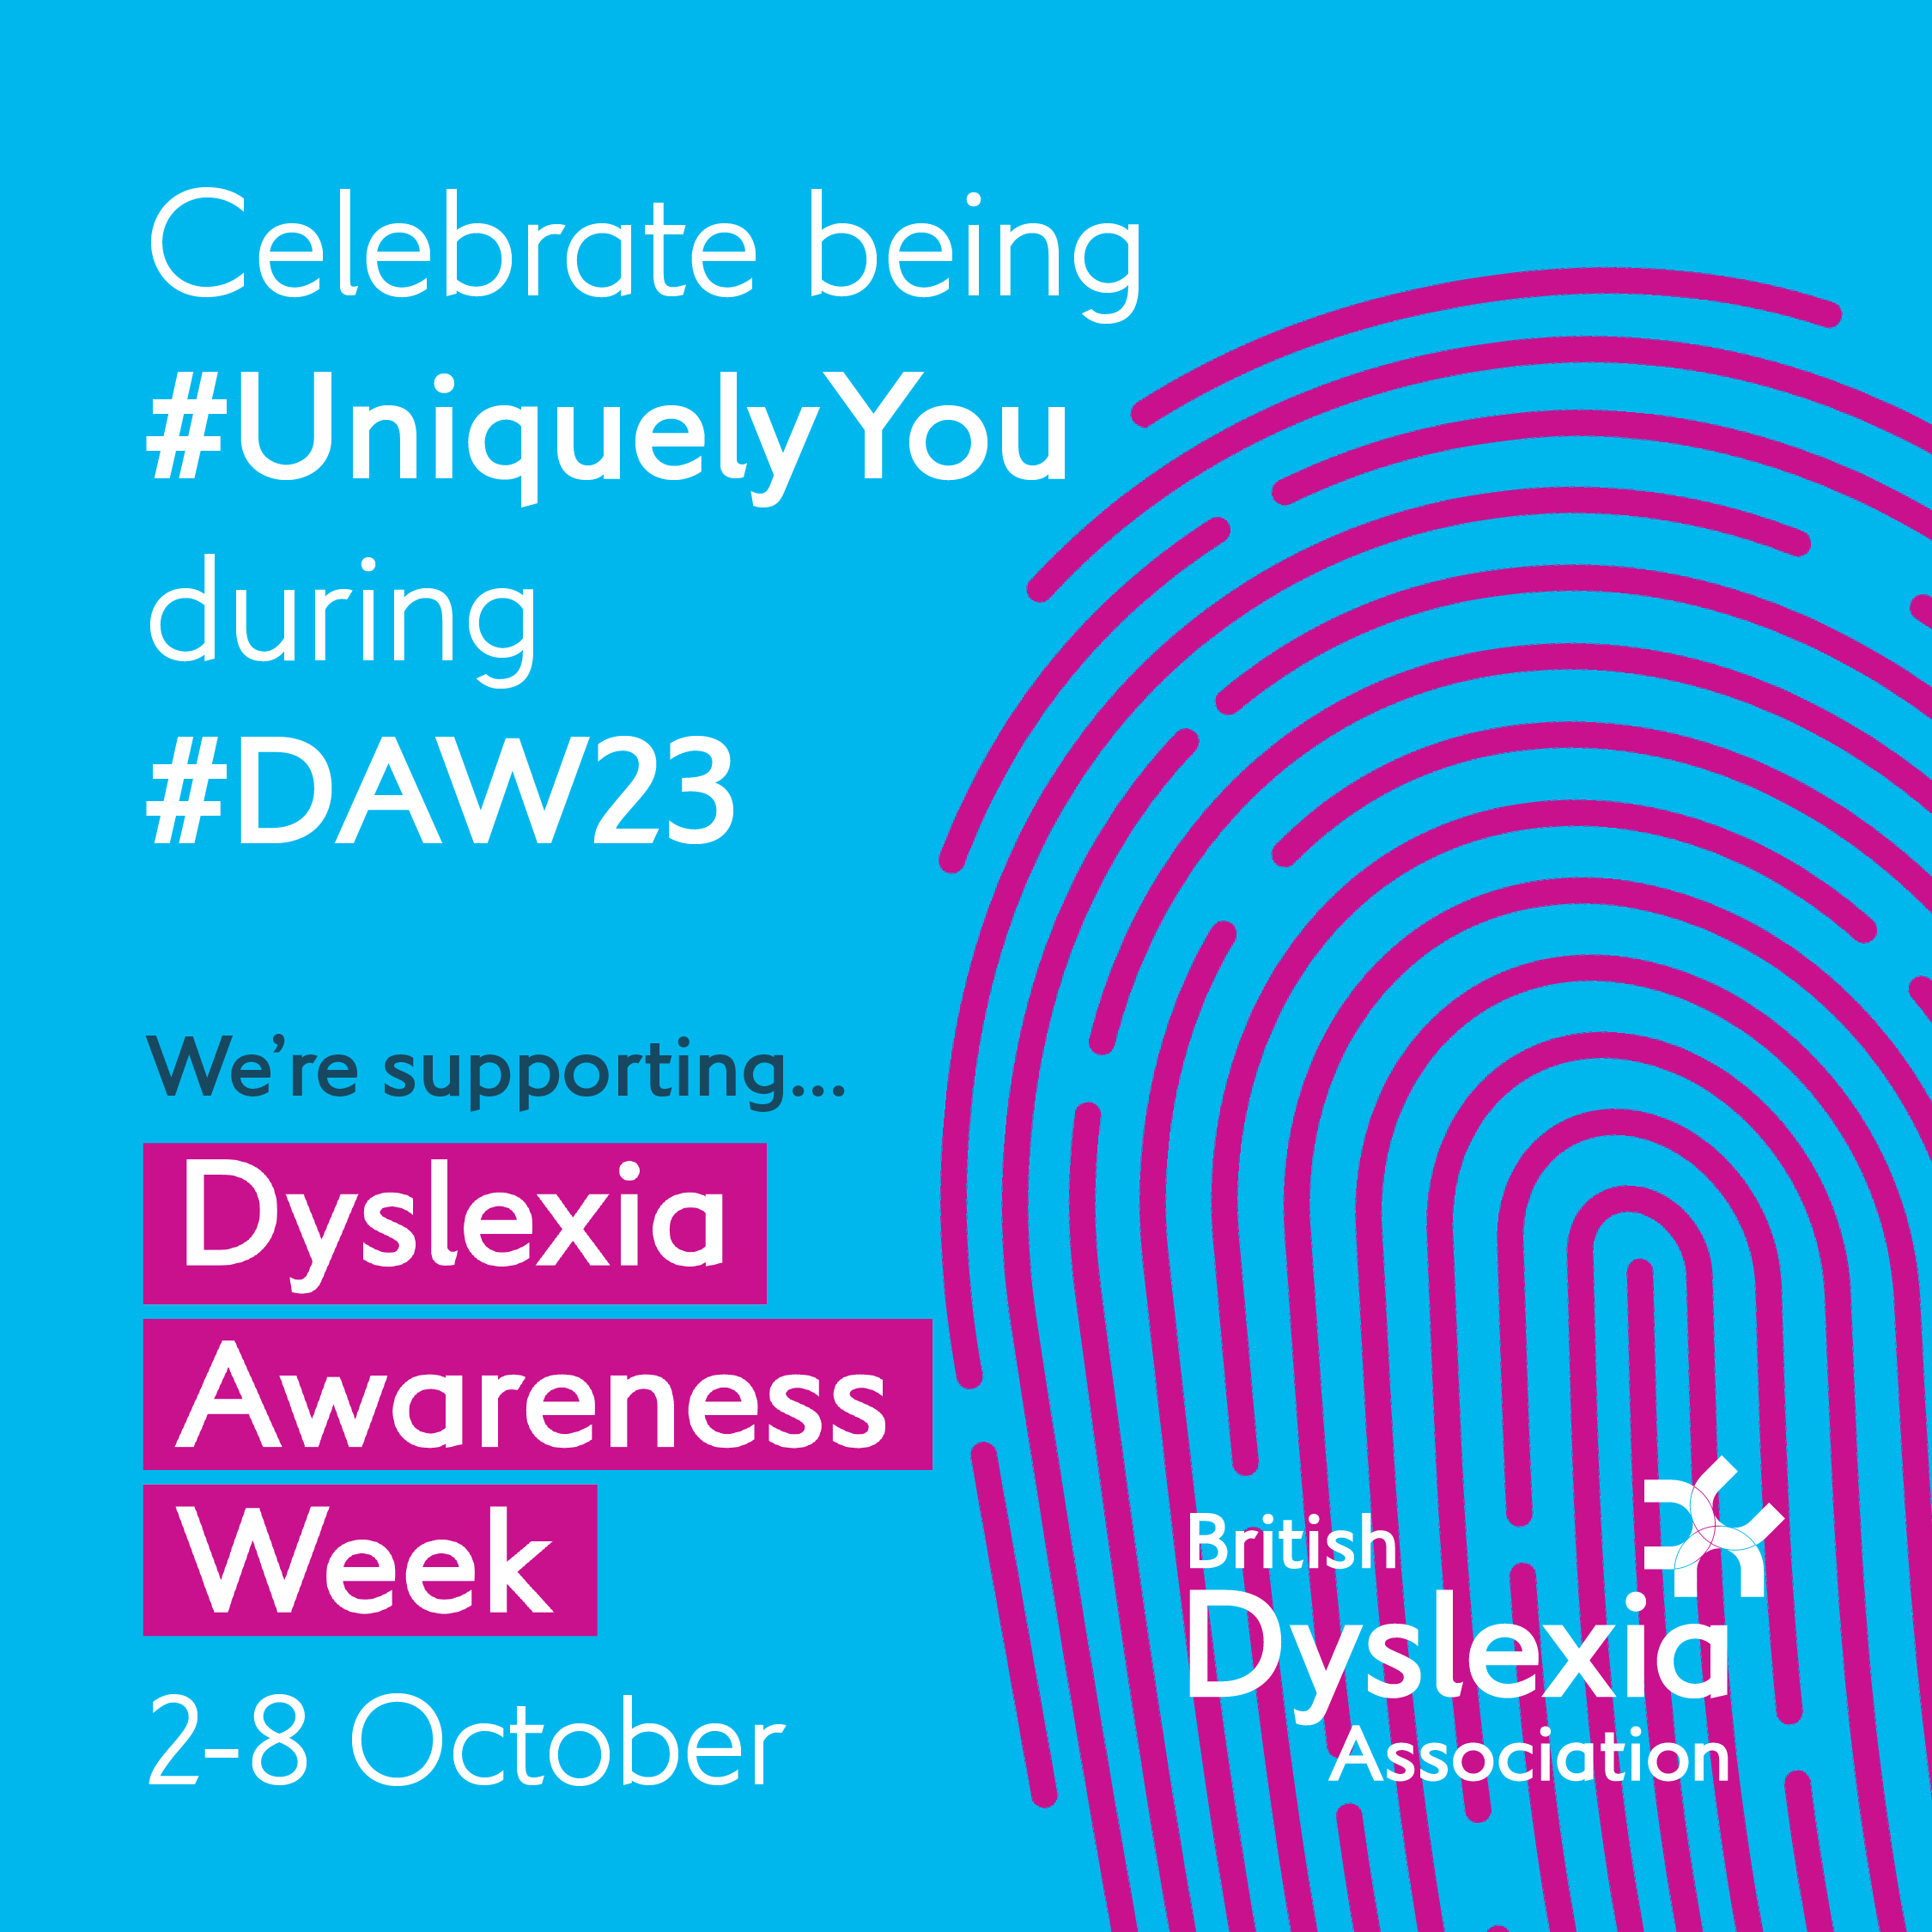 social media image which says celebrating being #uniquely you during ~DAW23. We're supporting Dyslexia Awareness Week 2-8 October and with an image of a finger print, in pink on a blue background.